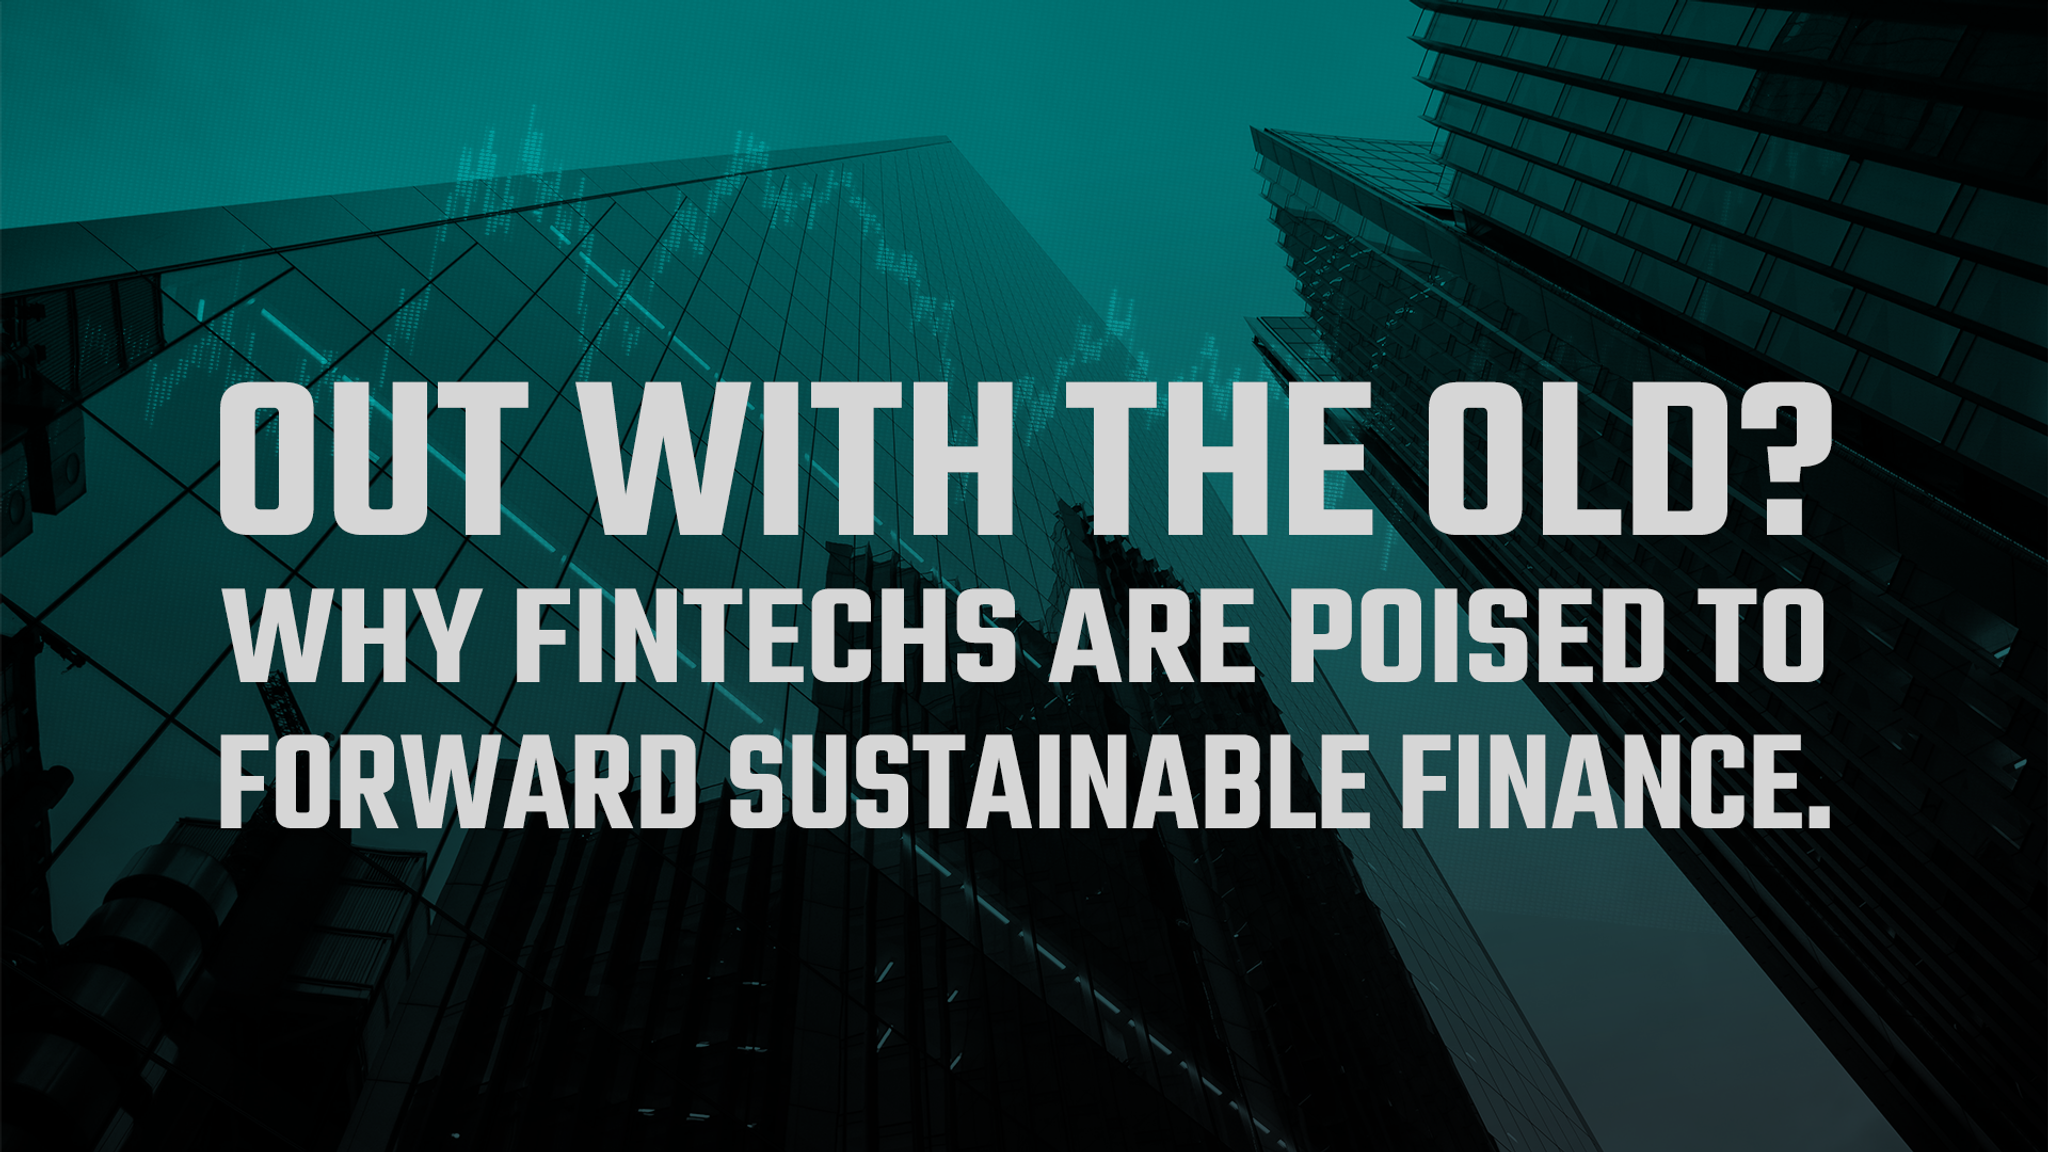 Out with the old? Why fintechs are poised to forward sustainable finance